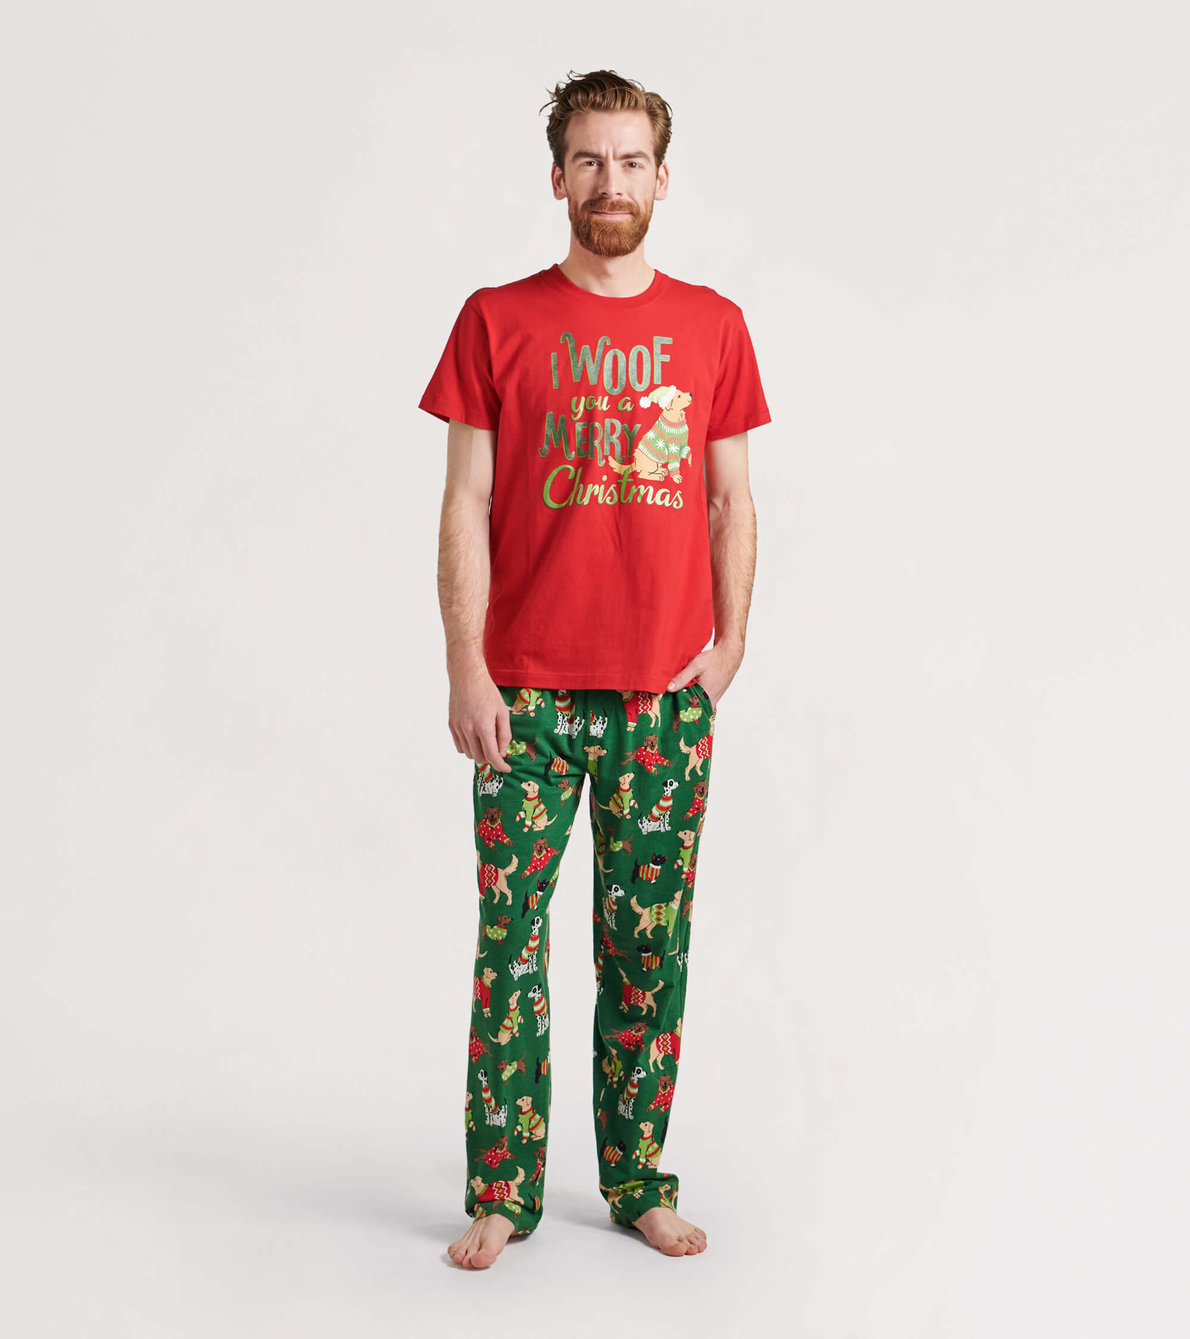 View larger image of Woofing Christmas Men's Tee and Pants Pajama Separates